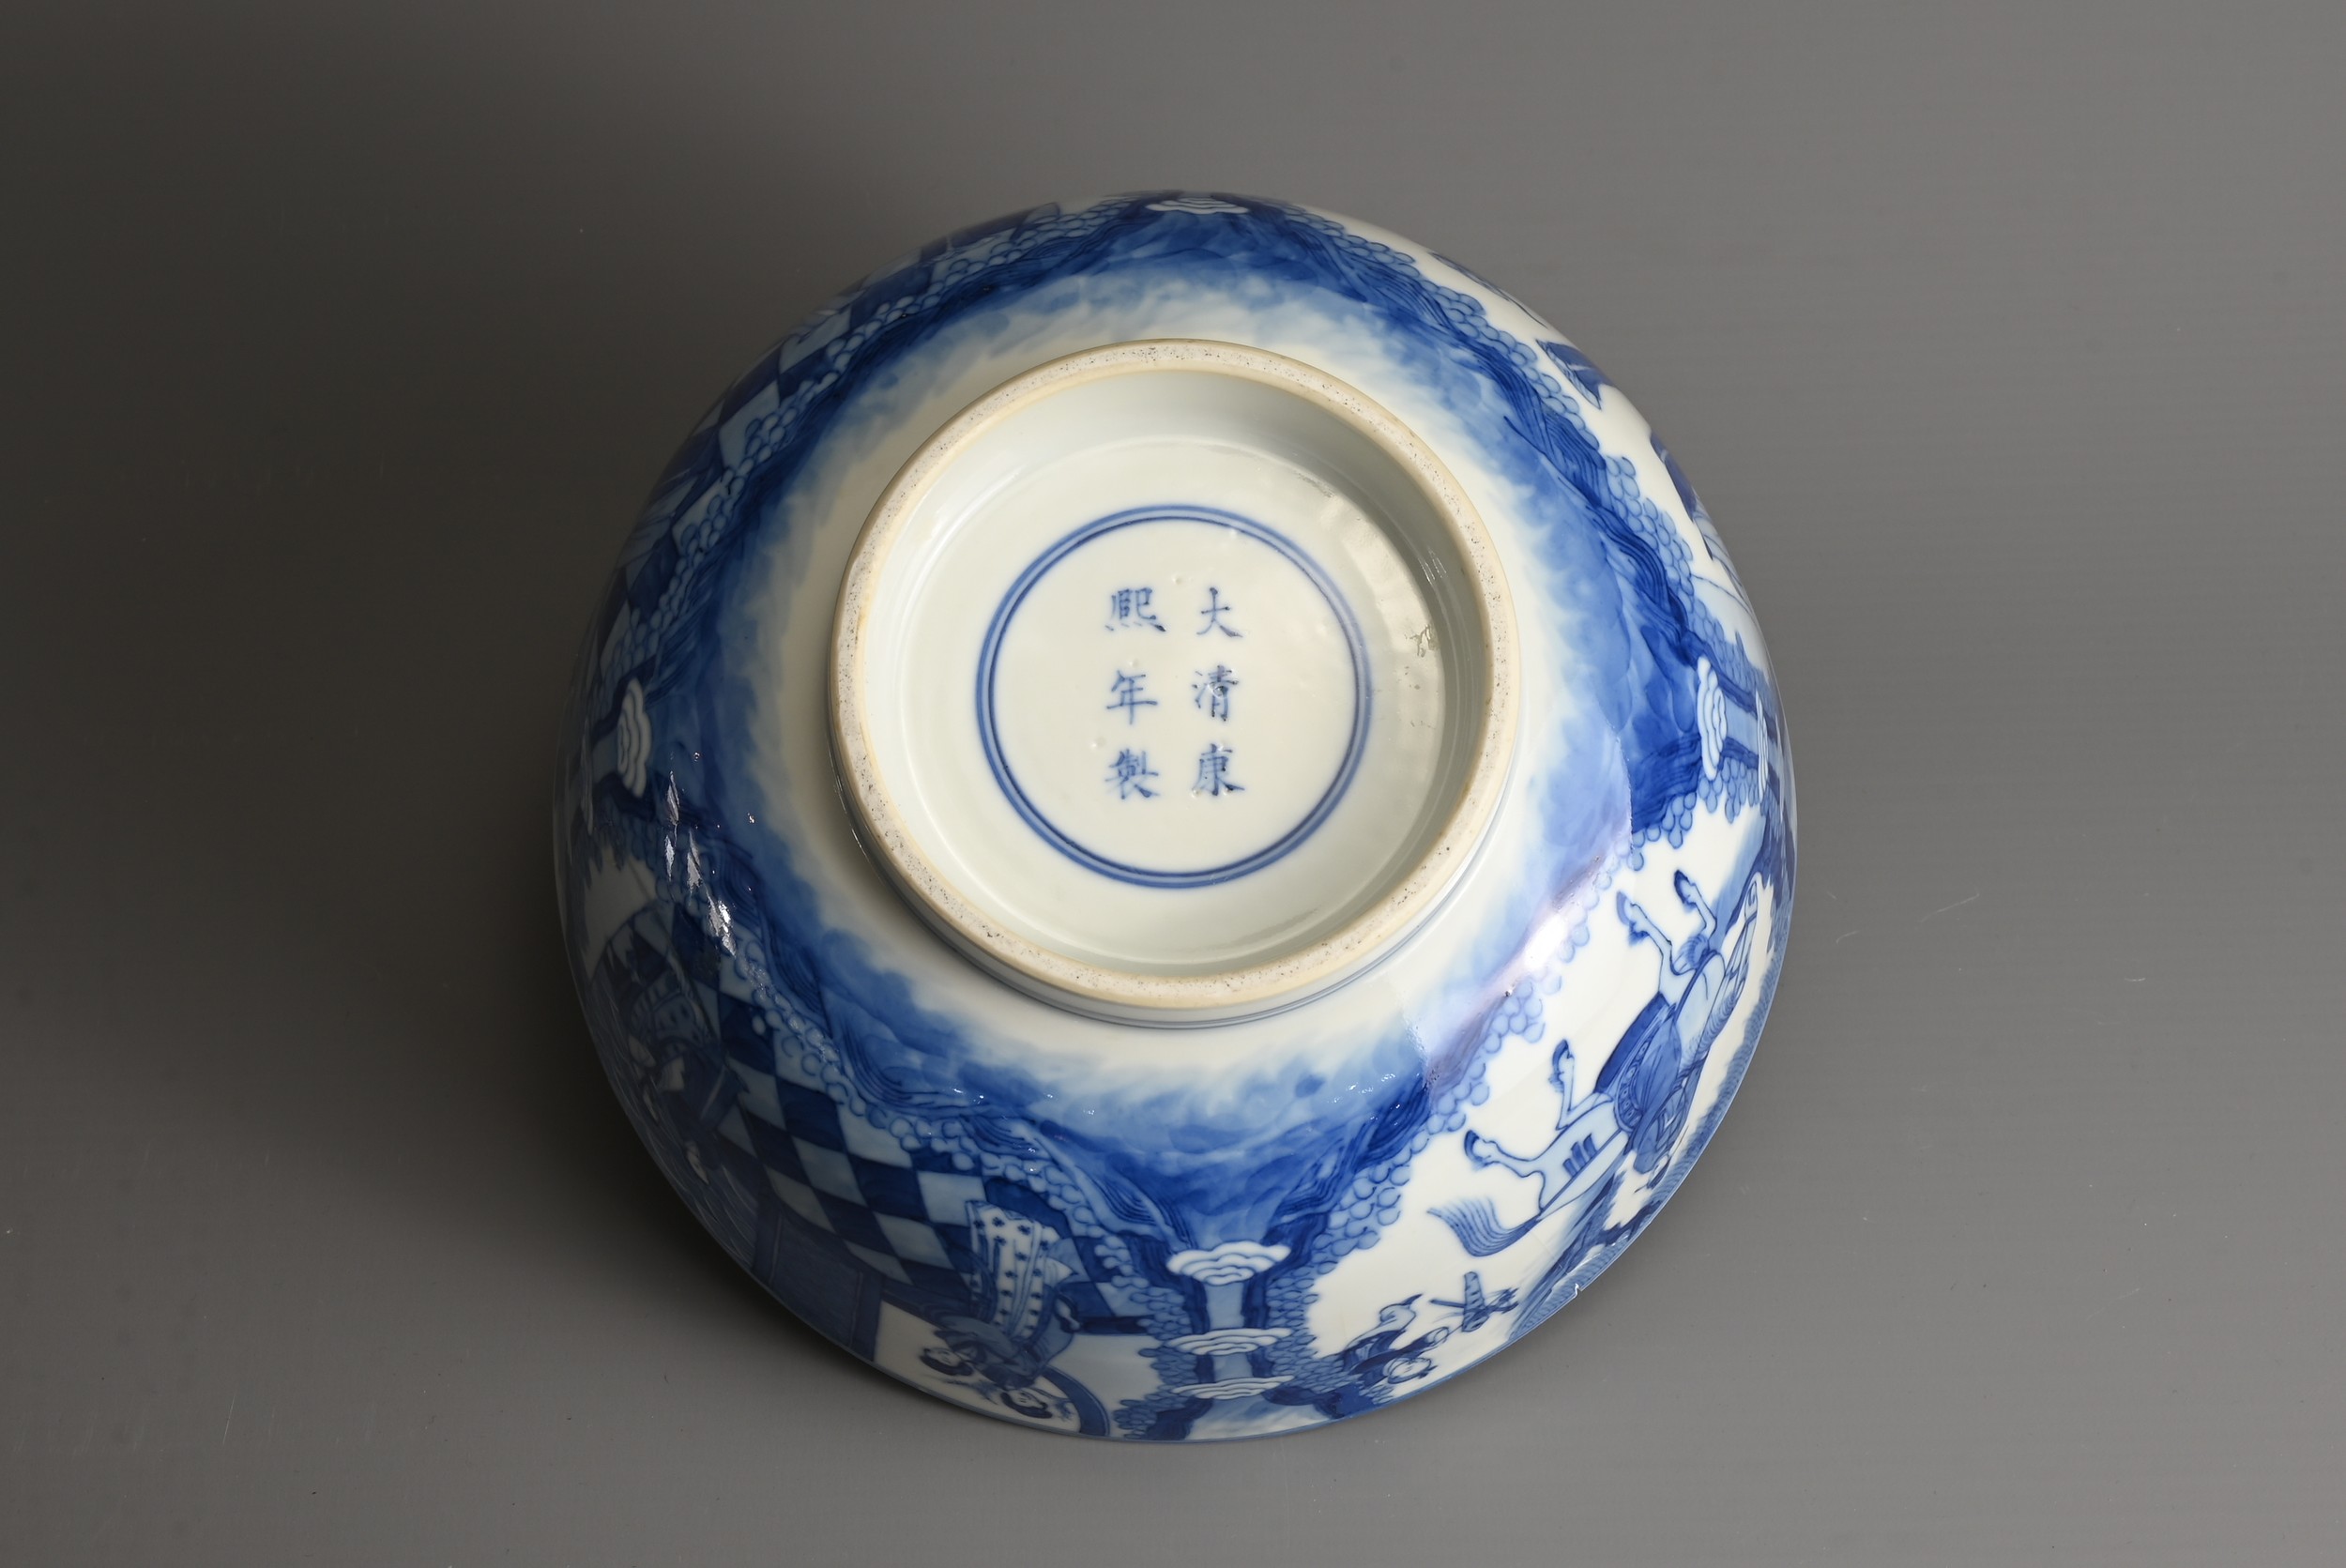 A CHINESE BLUE AND WHITE PORCELAIN BOWL, KANGXI PERIOD. Decorated with scene from the 'Romance of - Image 8 of 9